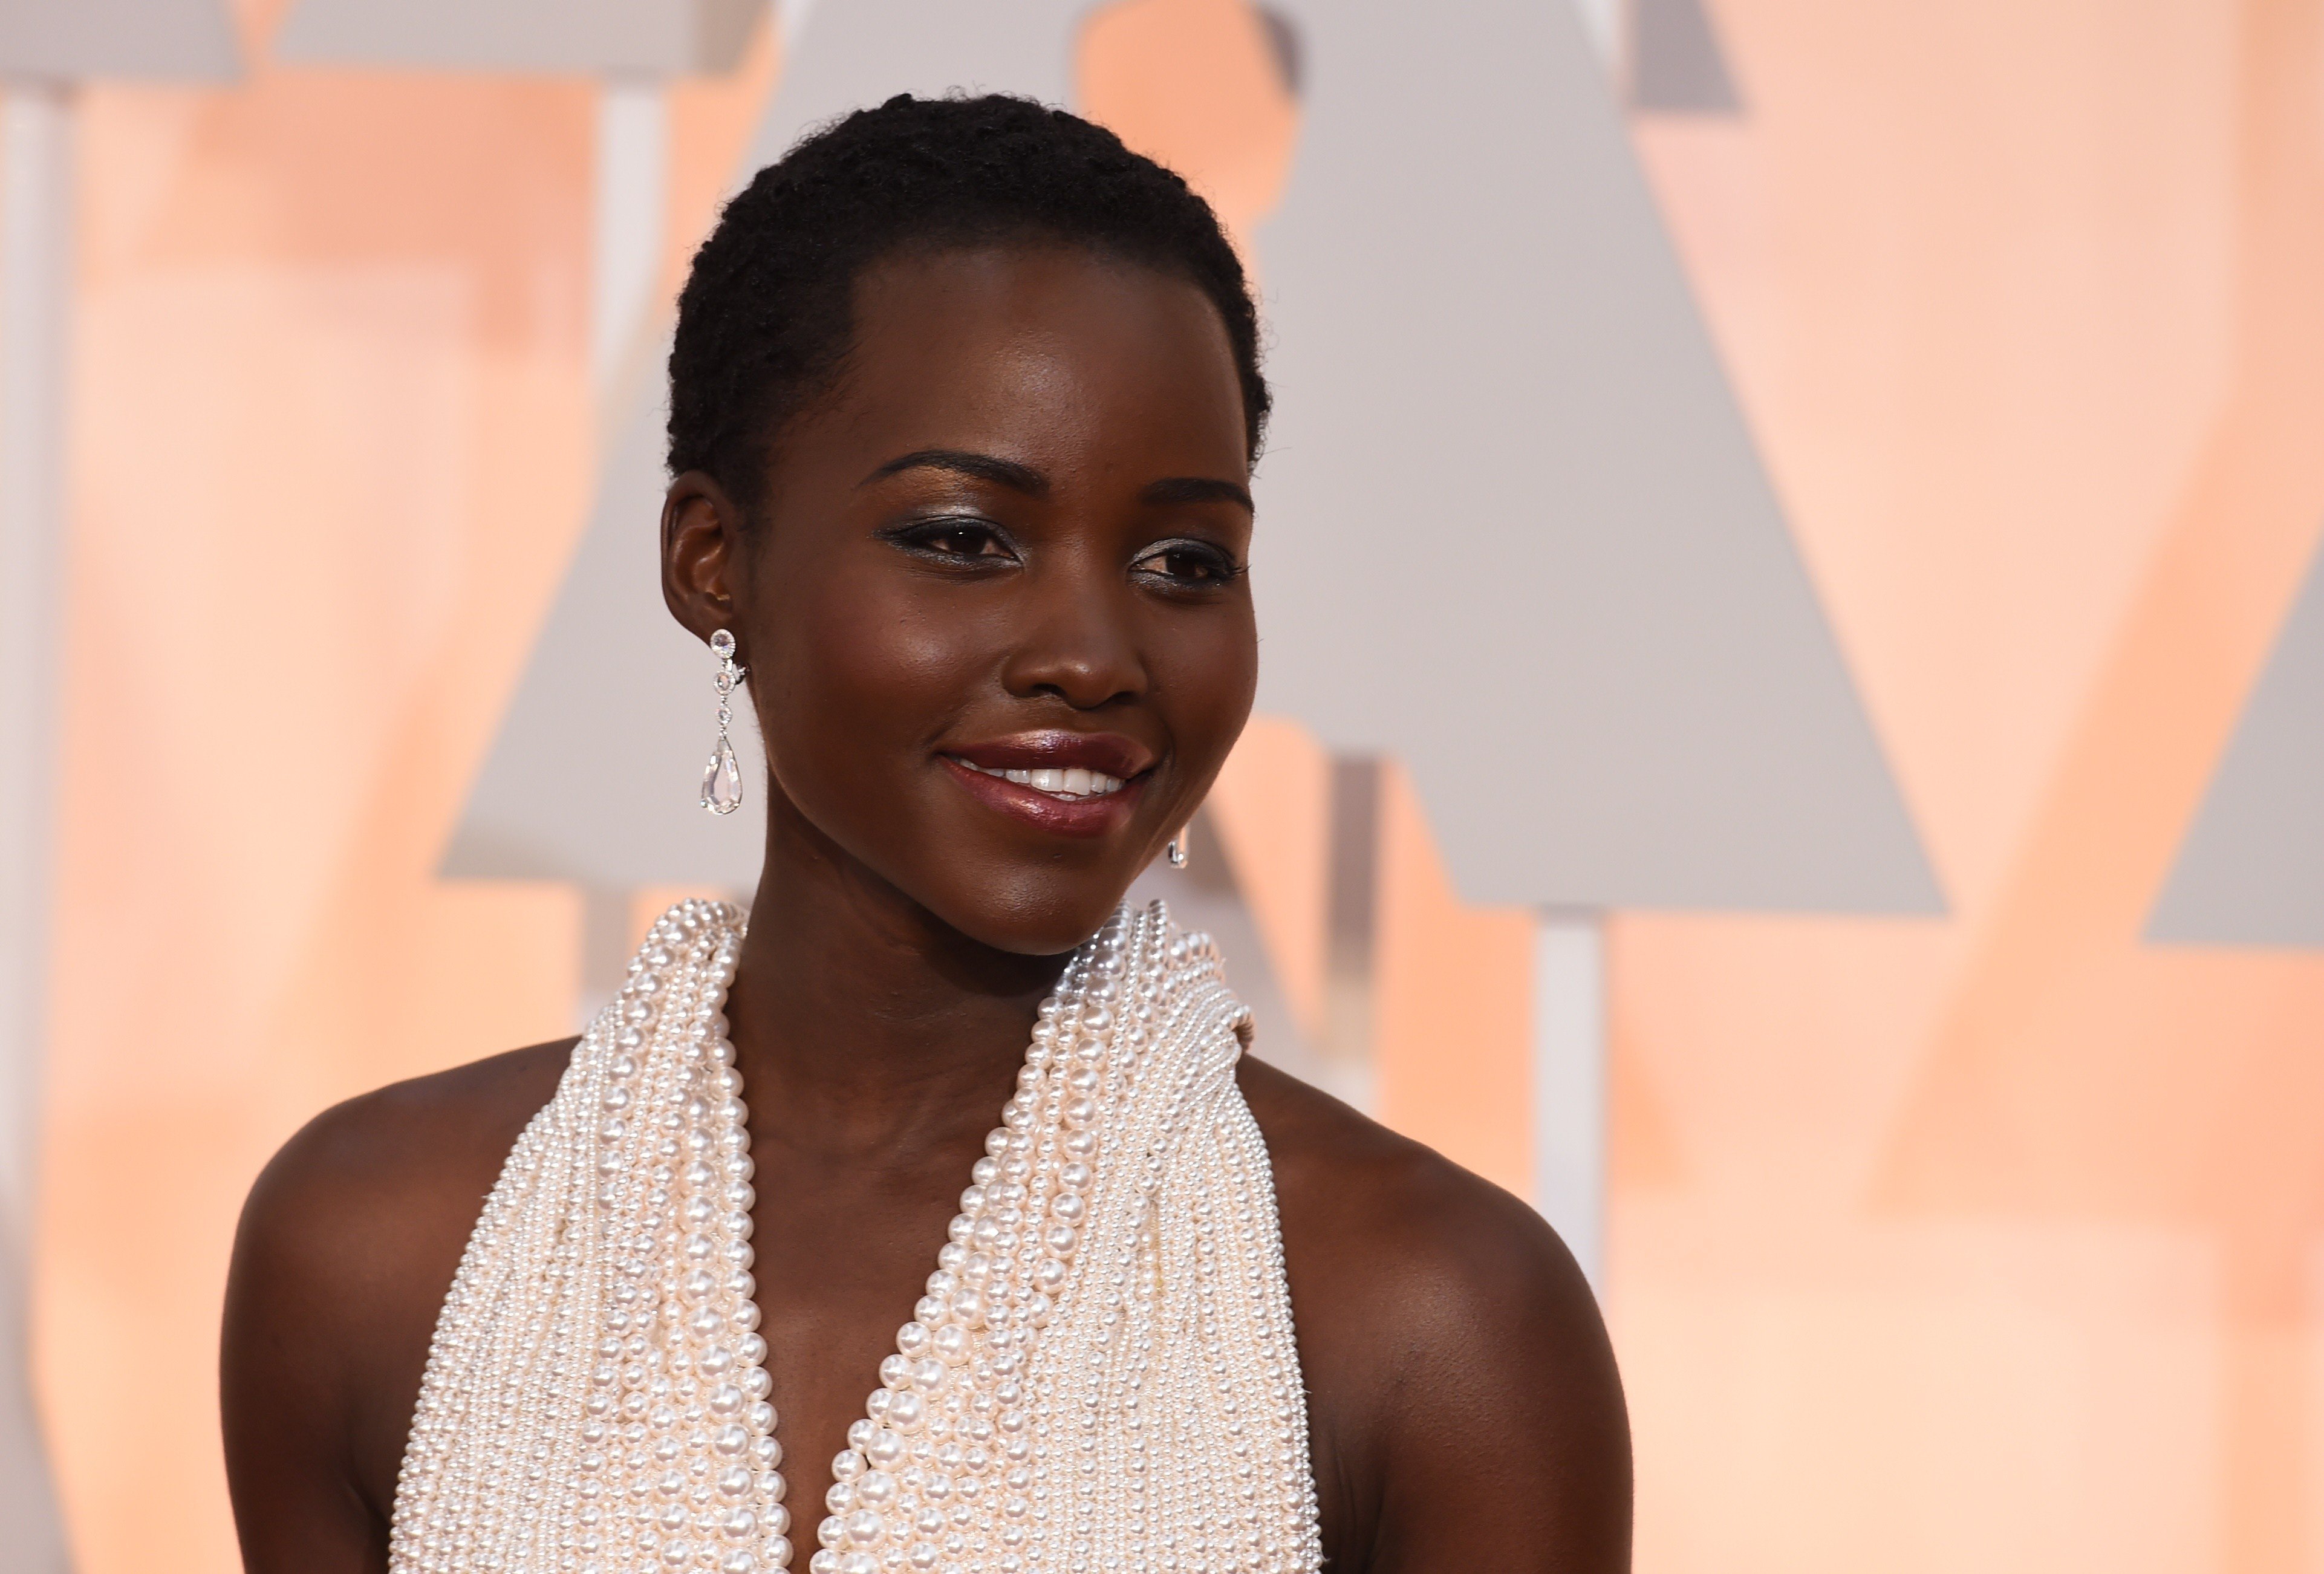 Actress Lupita Nyong'o arrives on the red carpet for the 87th Oscars on Feb. 22, 2015 in Hollywood. (Mark Ralston—AFP/Getty Images)